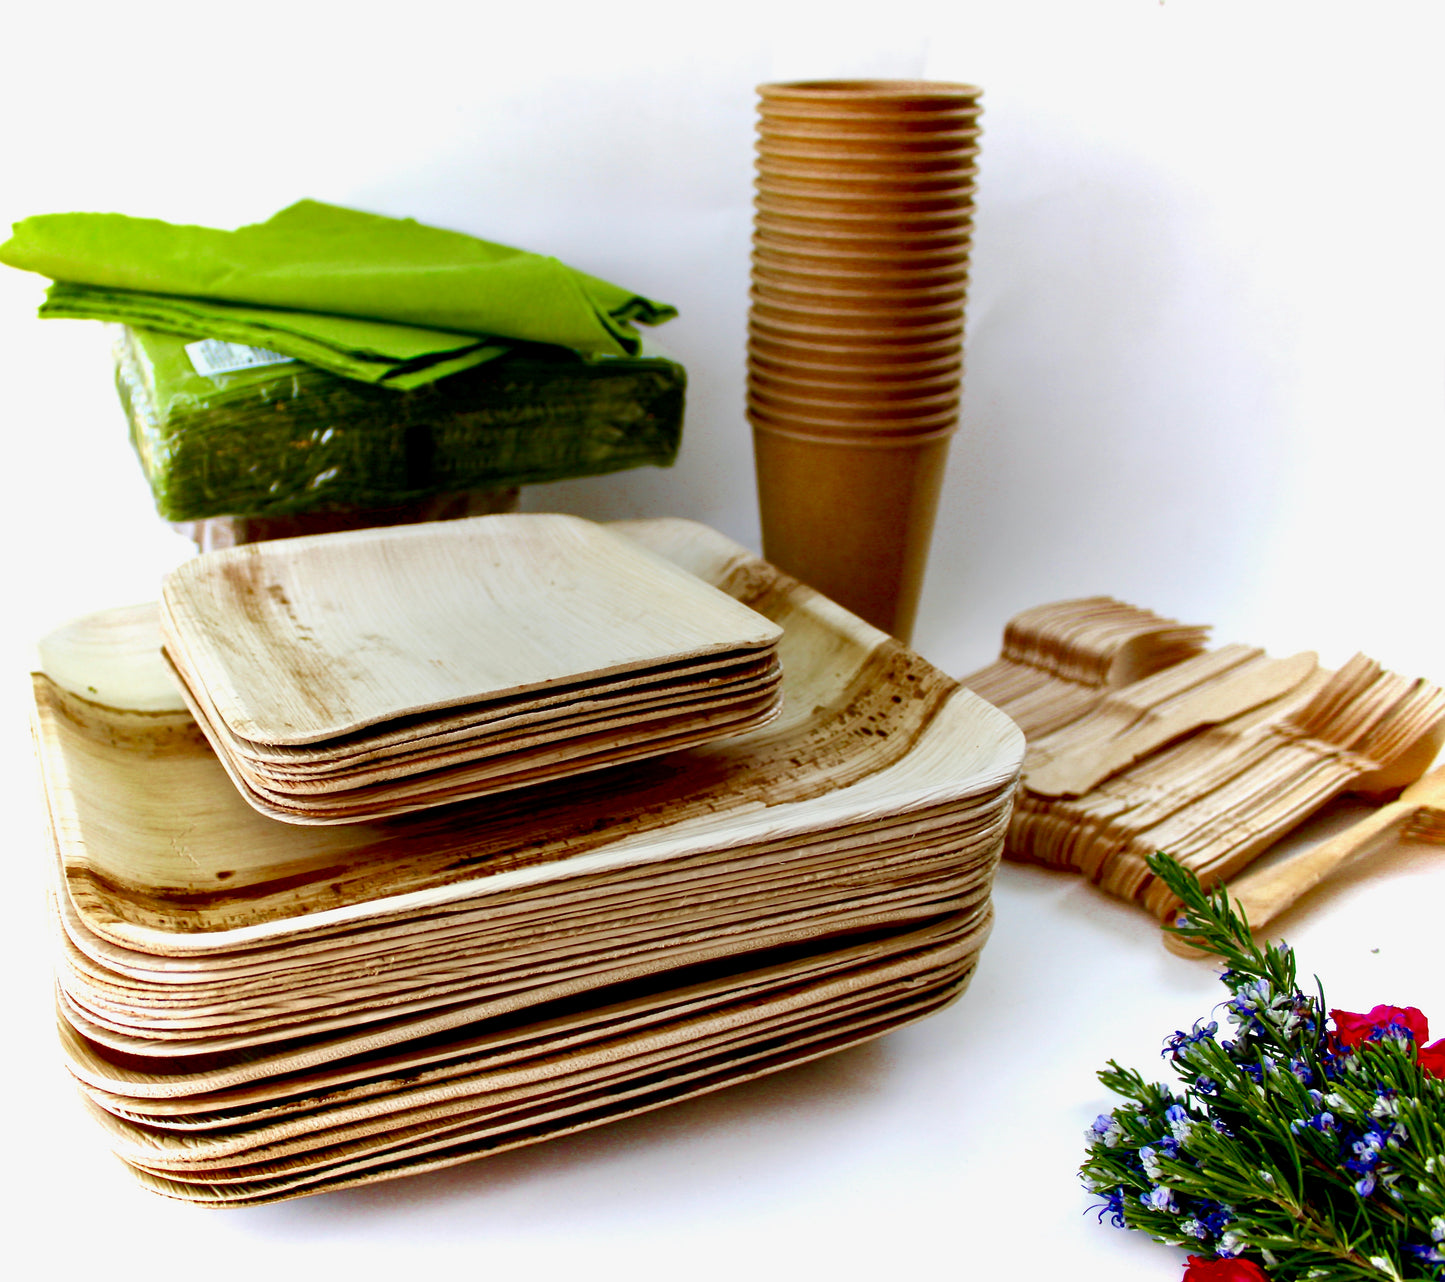 Copy of f Bamboo Type Palm Leaf 25 Pic 10"Square  - 25 pice  6"- Square - 25  pic  cup  - 75 pic Cutlery - 50 Pic Napkin